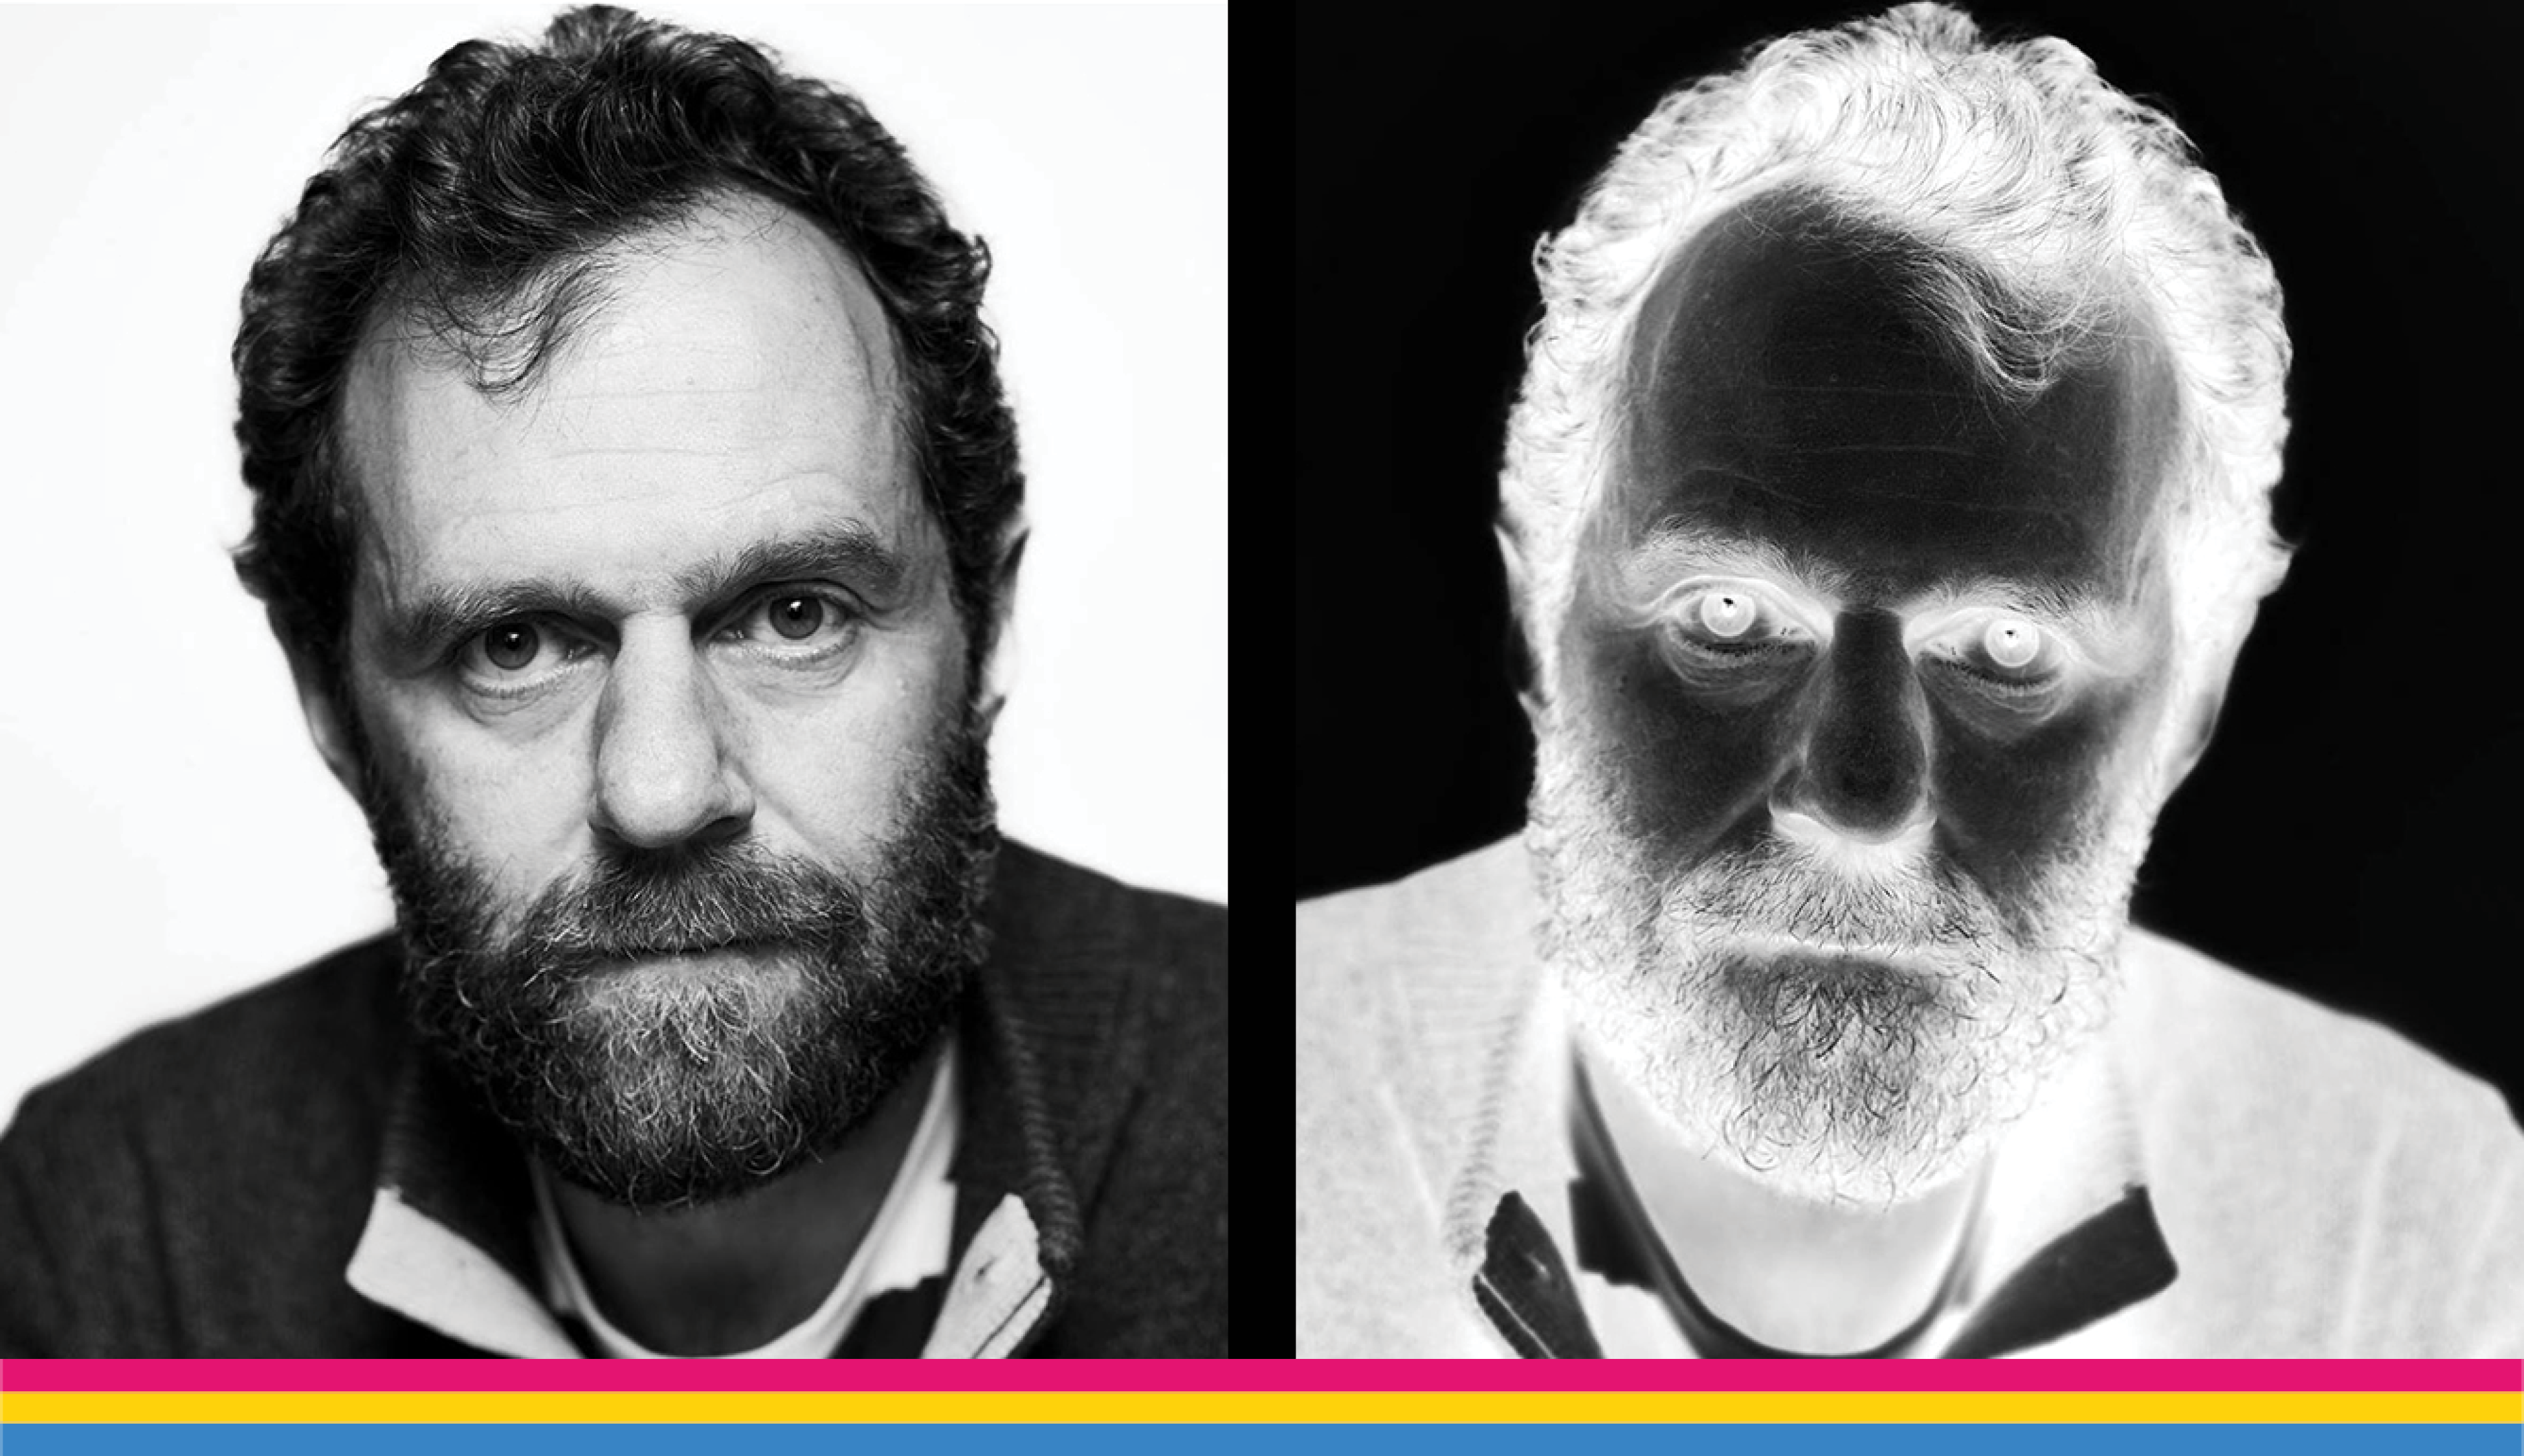 Two images arranged side-by-side in dyptich. To the left: A black & white photo of Dirk, a white German man with scruffy hair and beard and intense eyes, looks at the camera. On the right: the same image in negative. All the black parts now appear in white and vice versa. Self portrait courtesy of the artist.